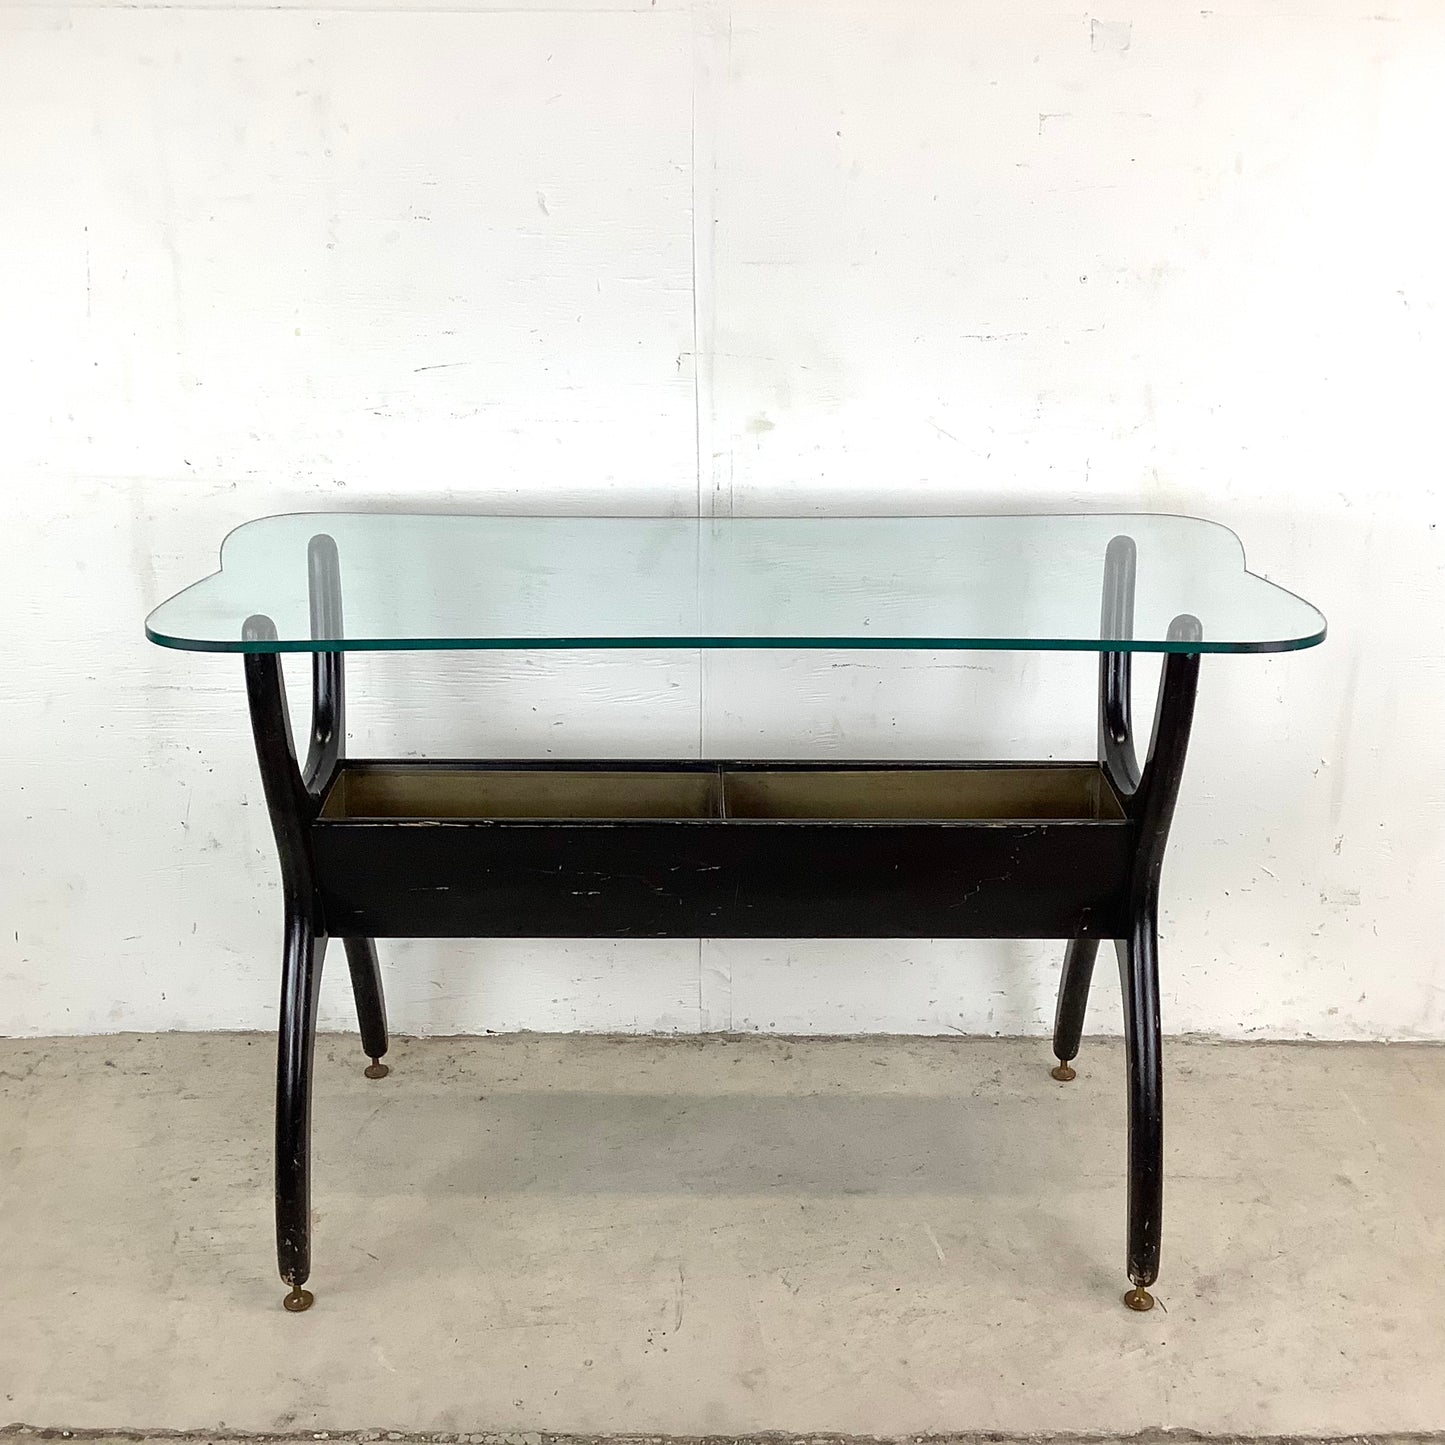 Sculptural Mid-Century Modern Console Table